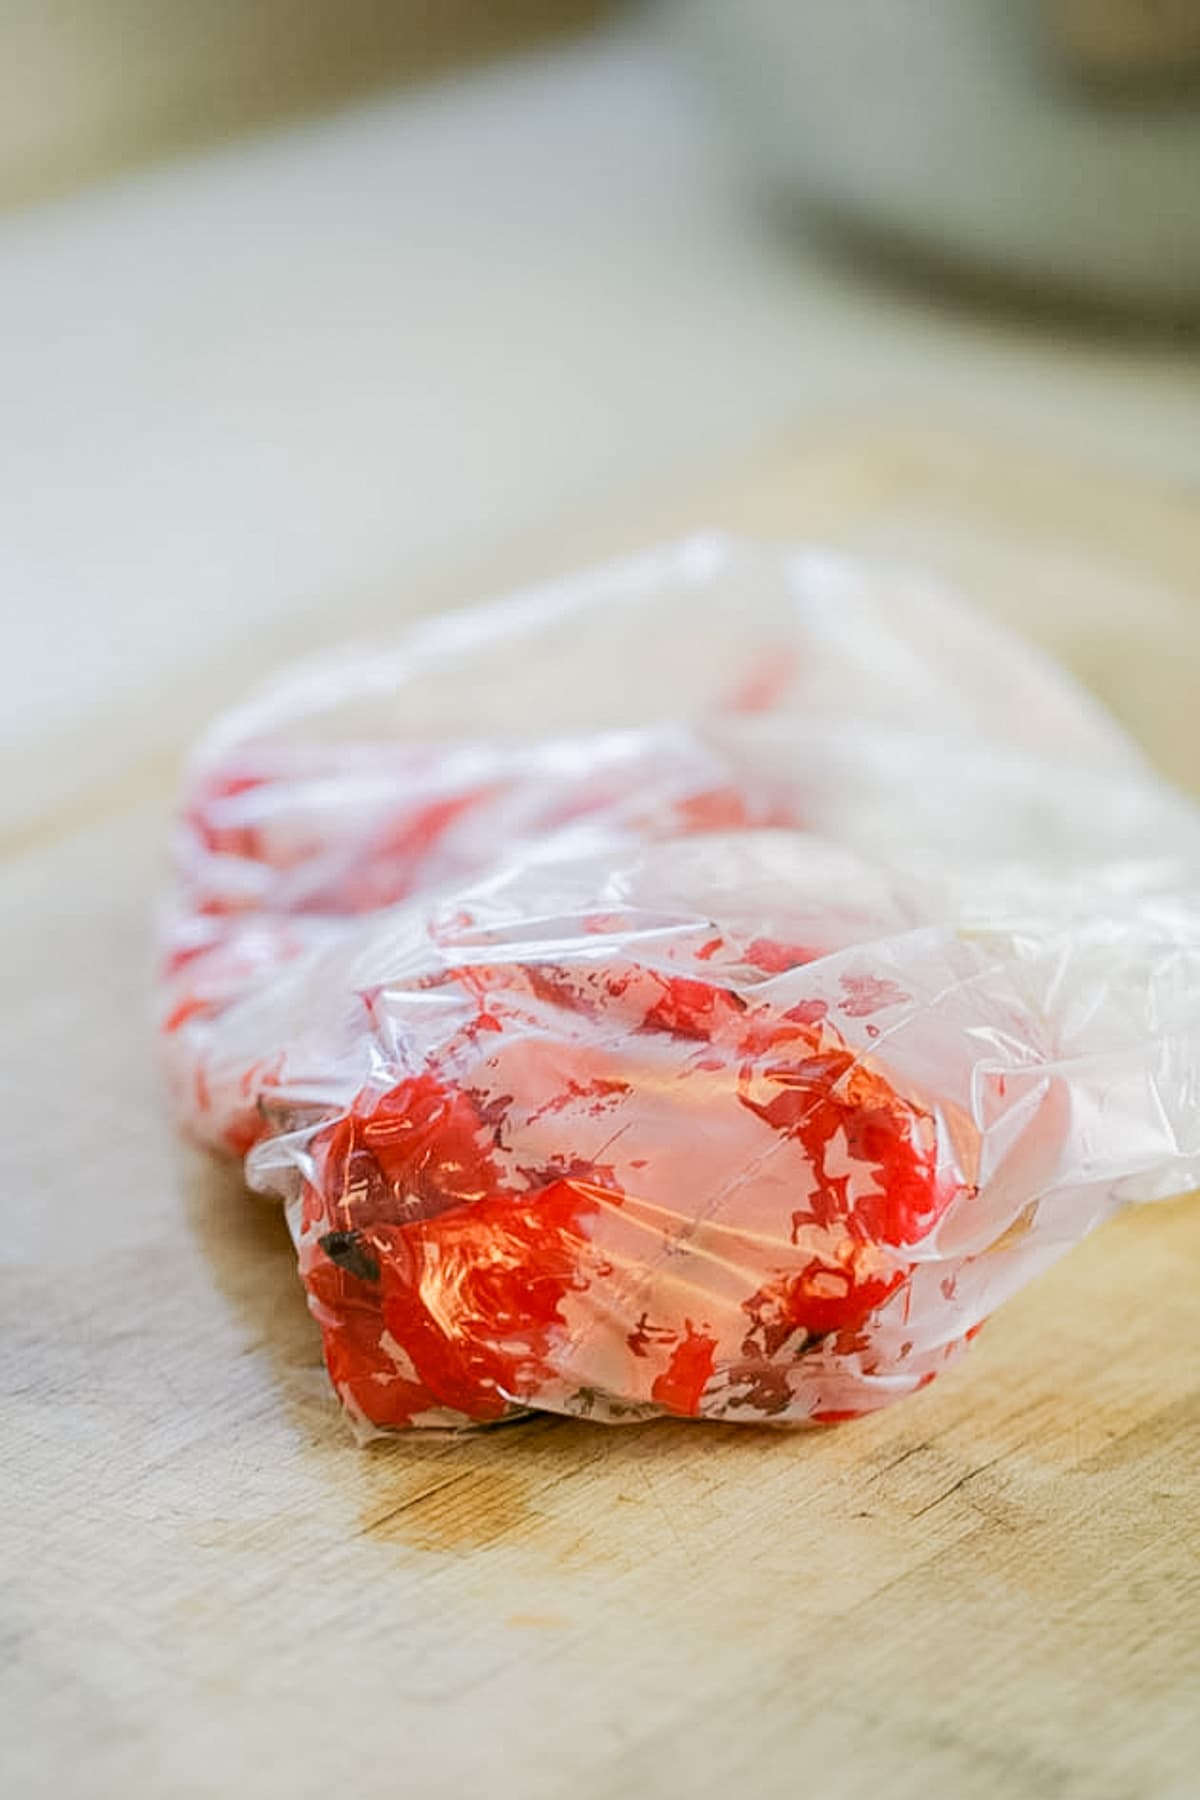 adding peppers to a plastic bag